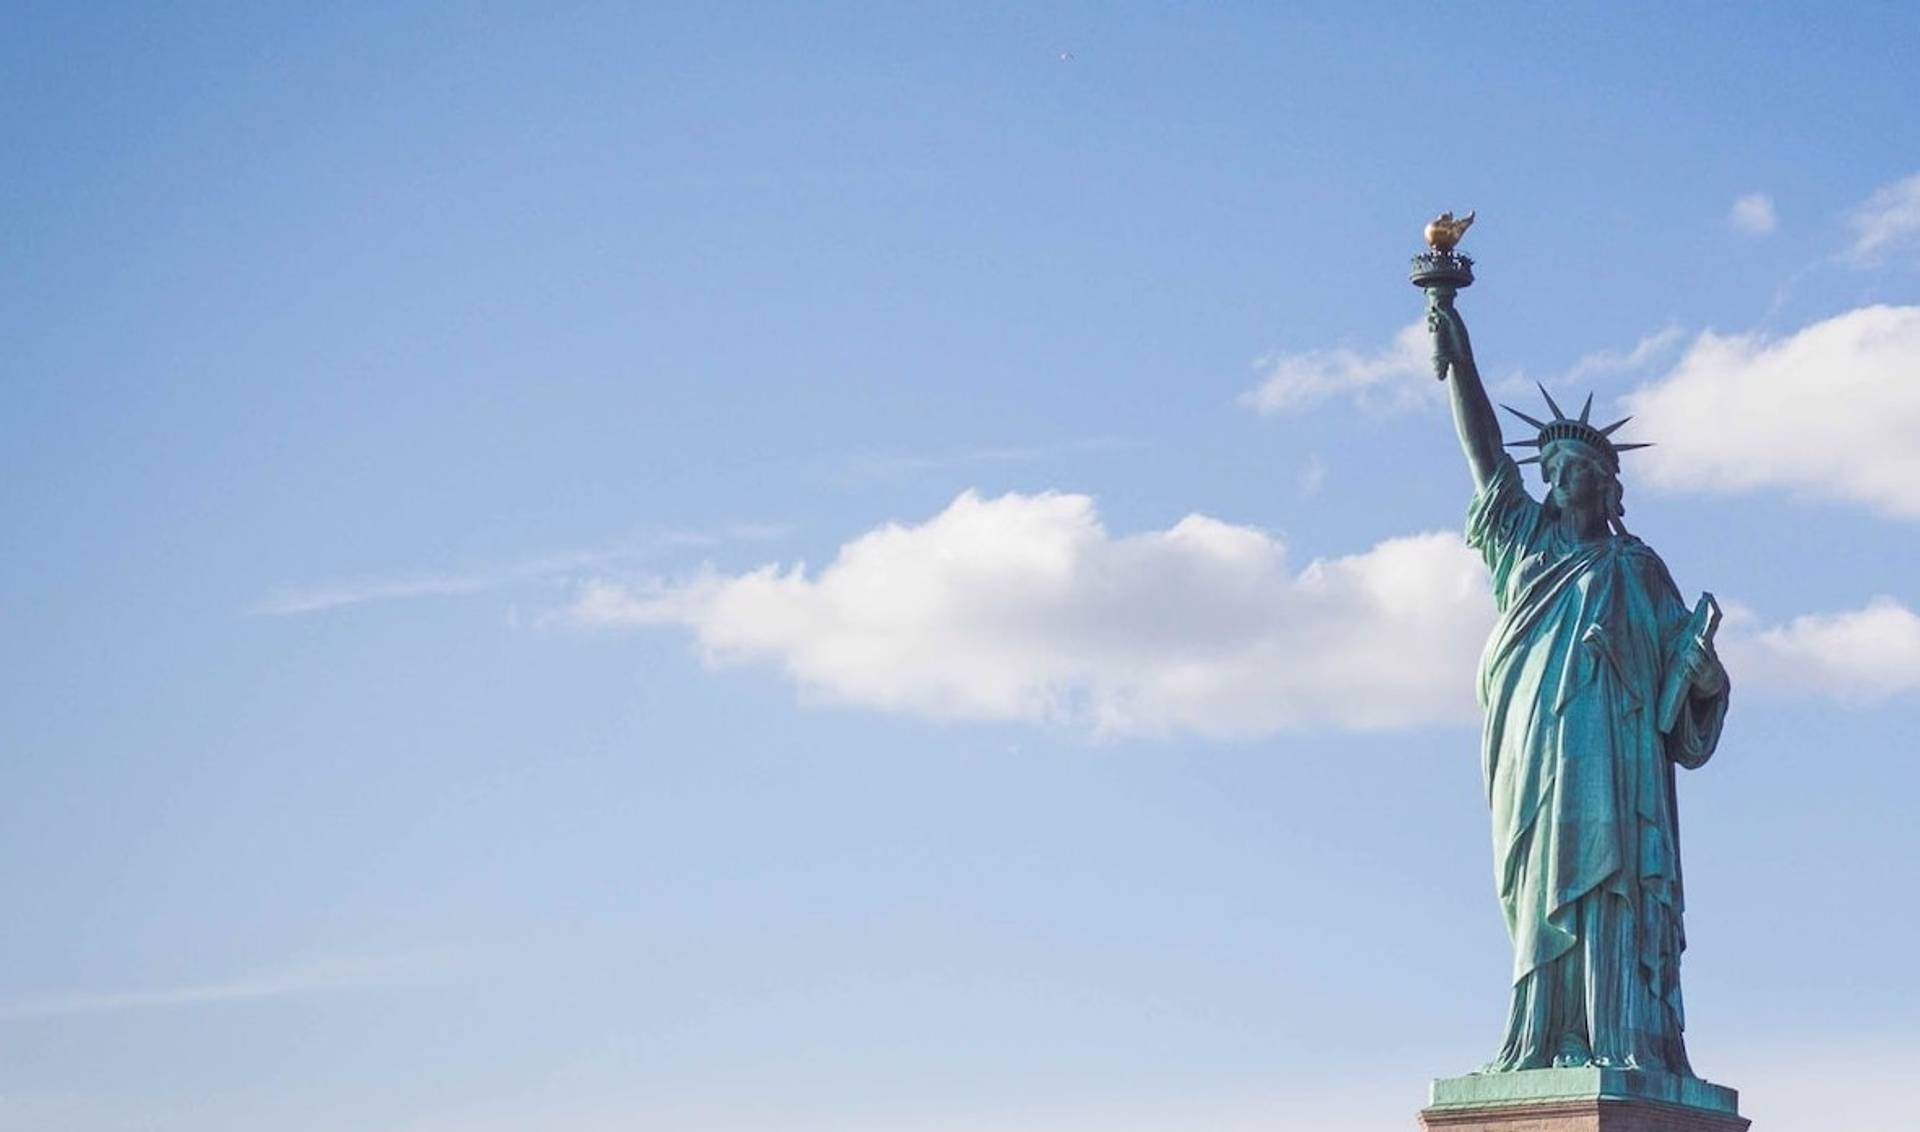 Statue of Liberty to represent where to buy e-bikes in New York